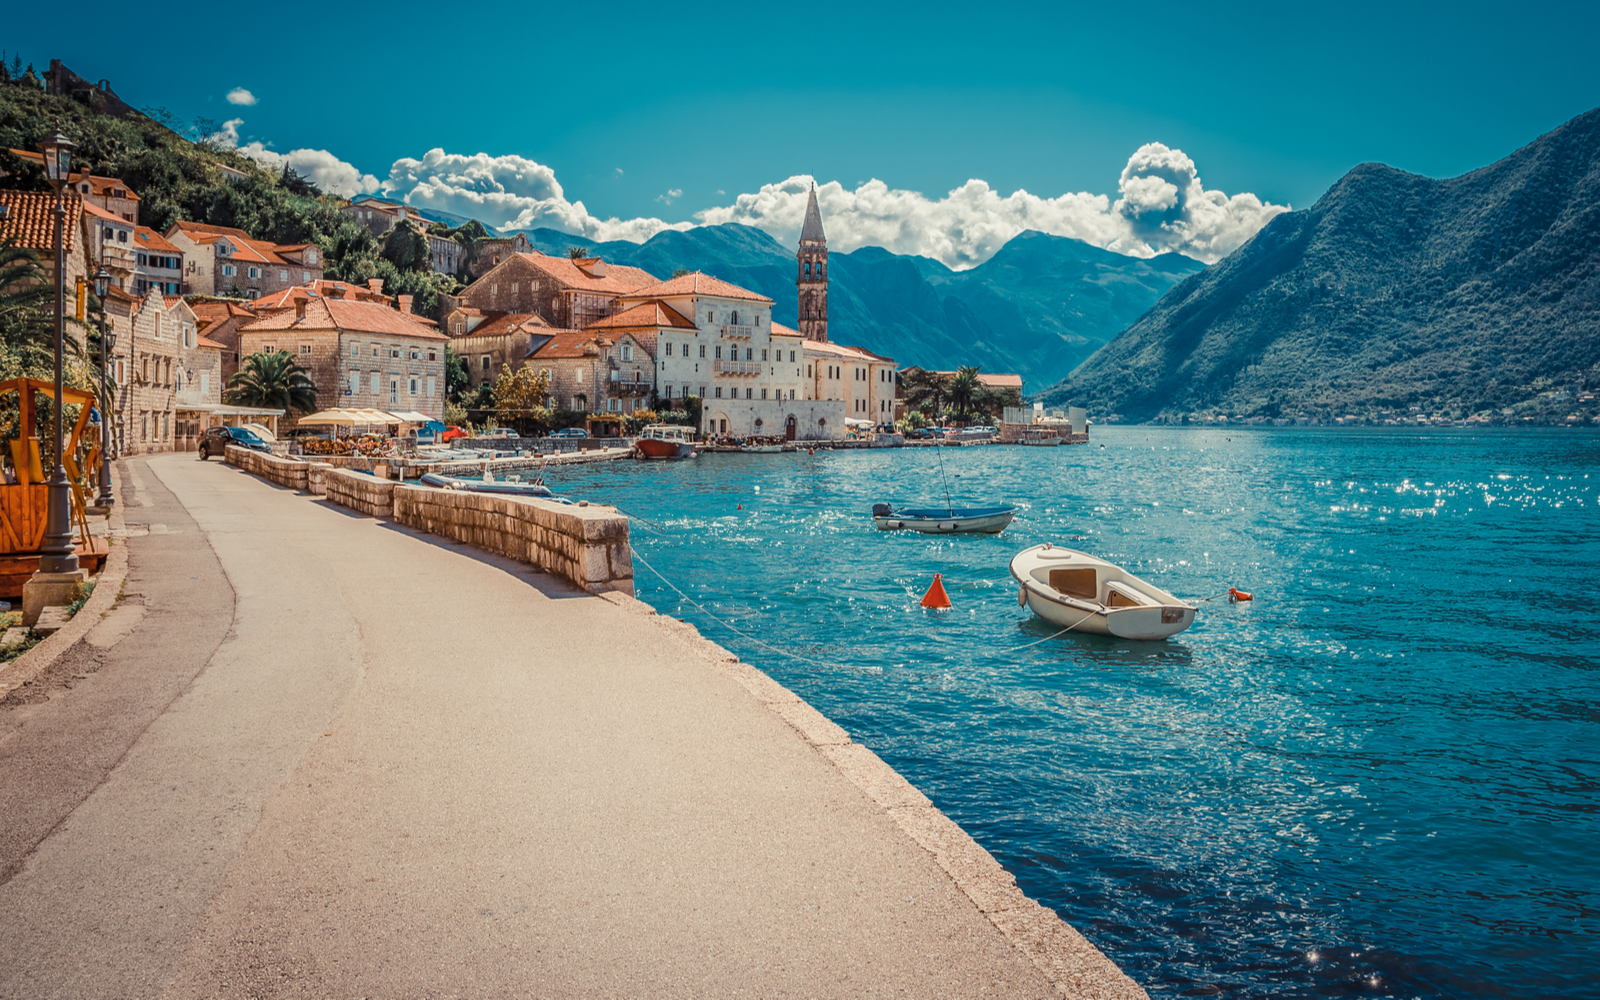 Harbor and boats in the Boka Kotor bay in Montenegro during the best time to visit Europe